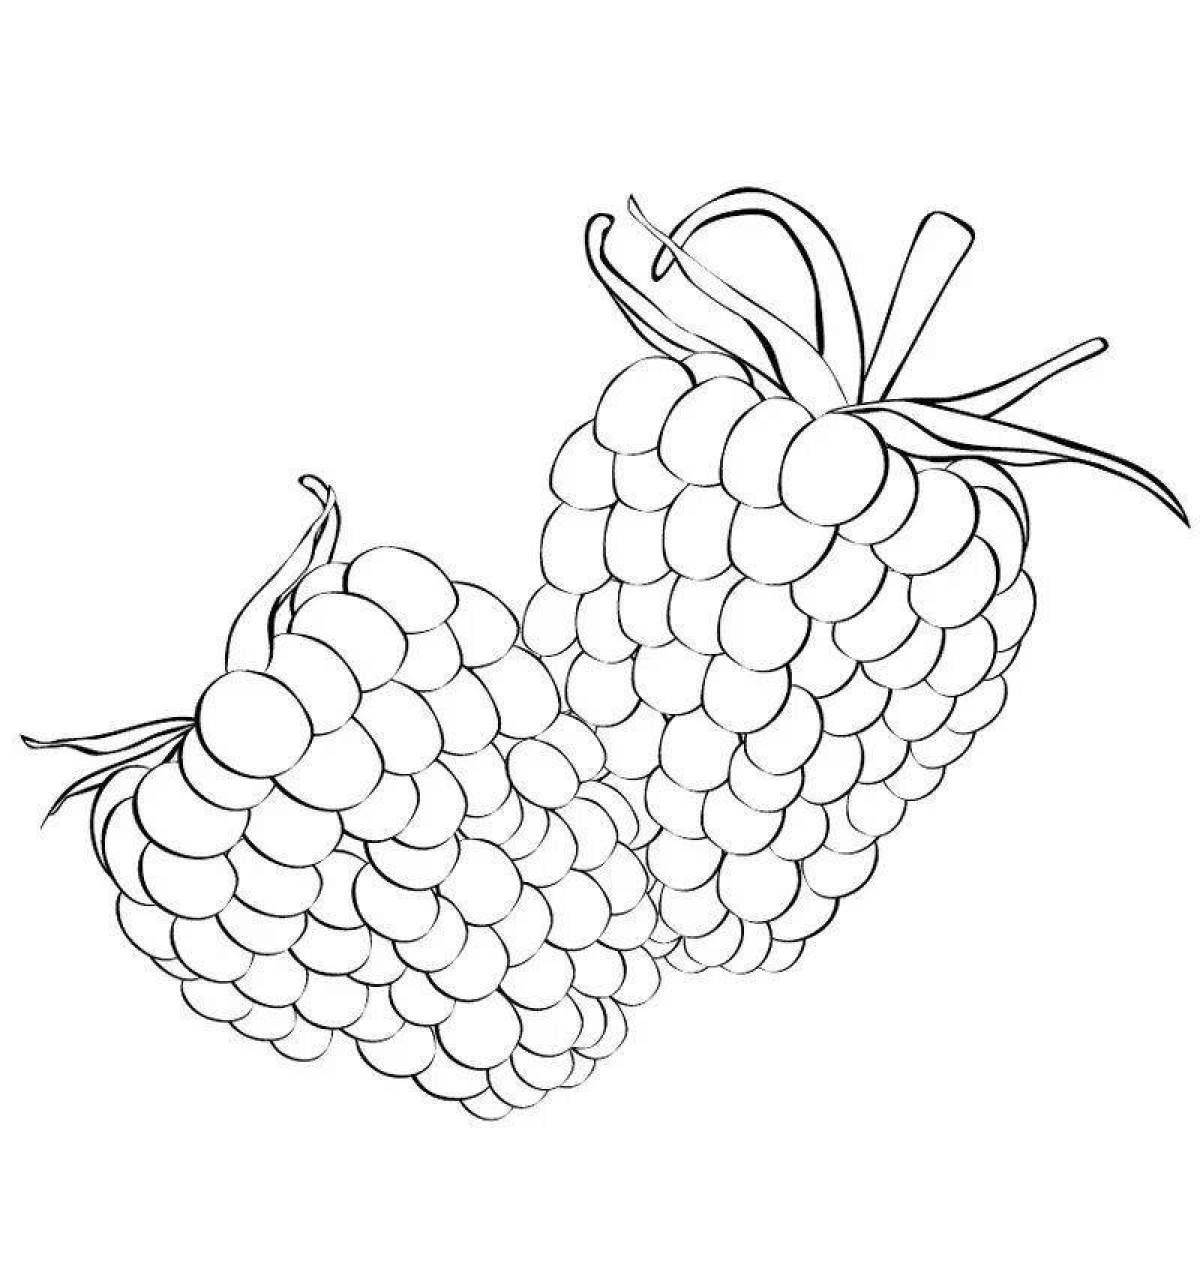 Coloring page funny raspberry